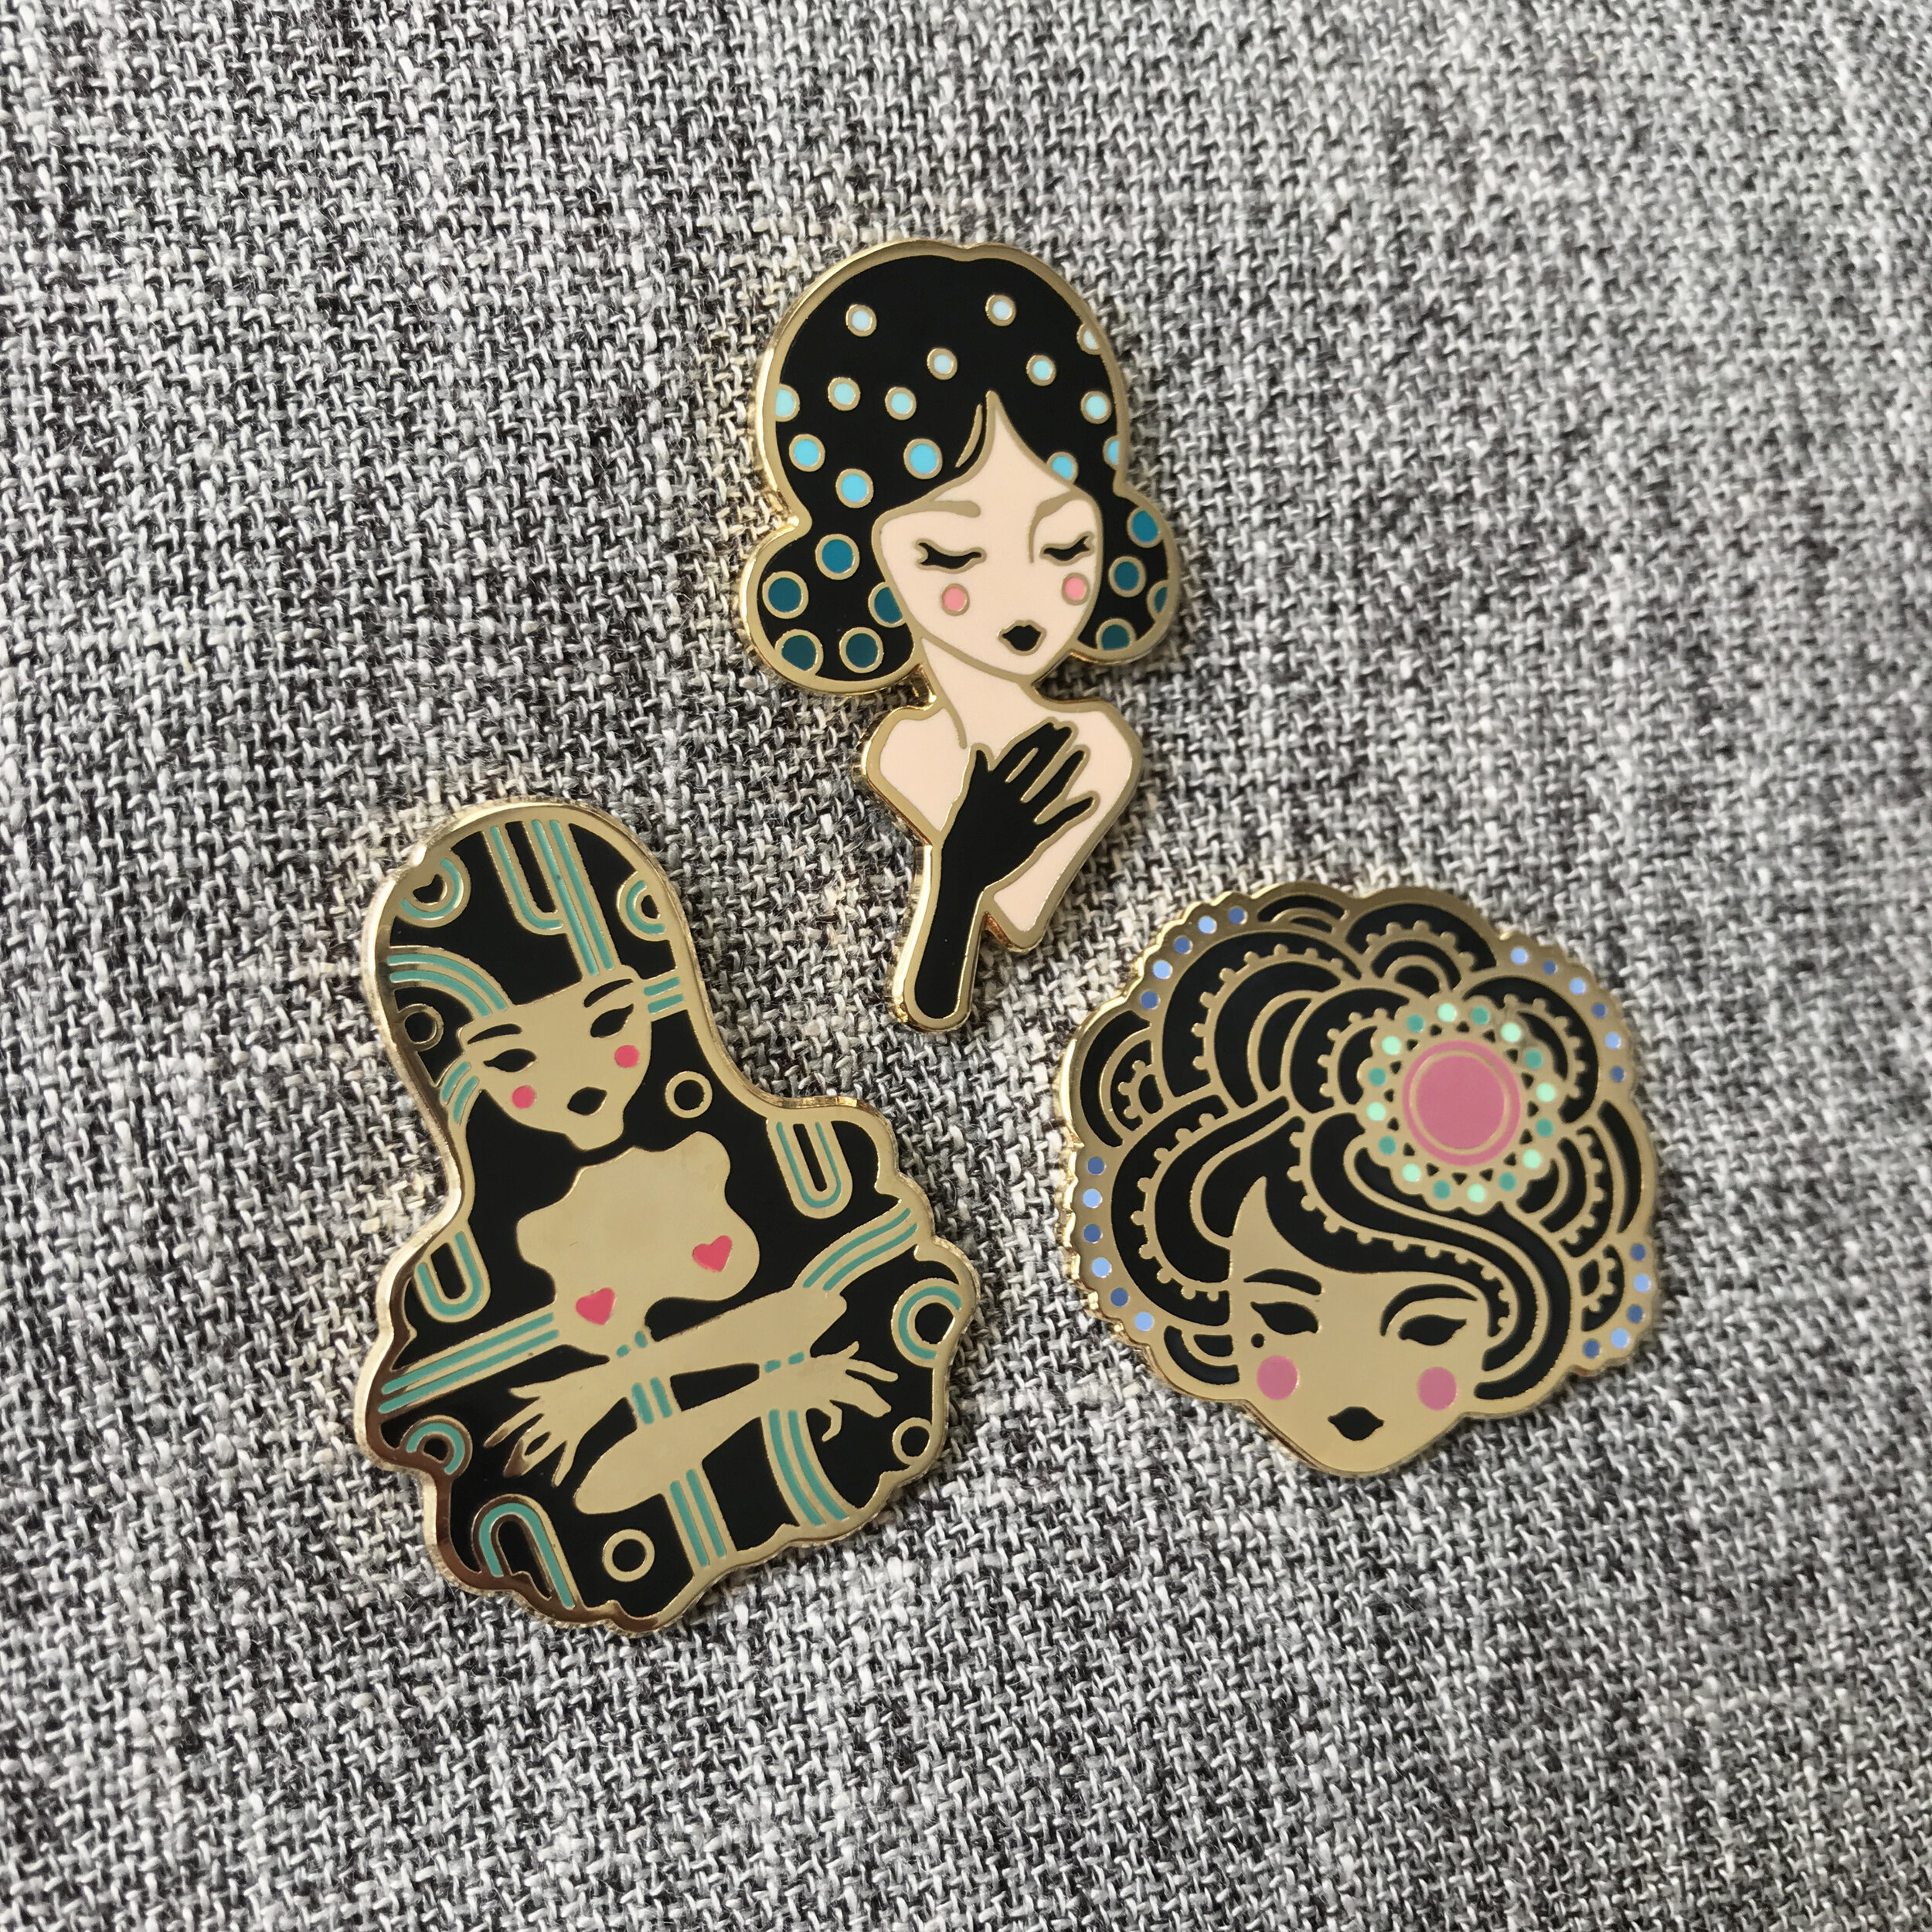  Enamel Pins. Clara, Florence, and Lilly. 